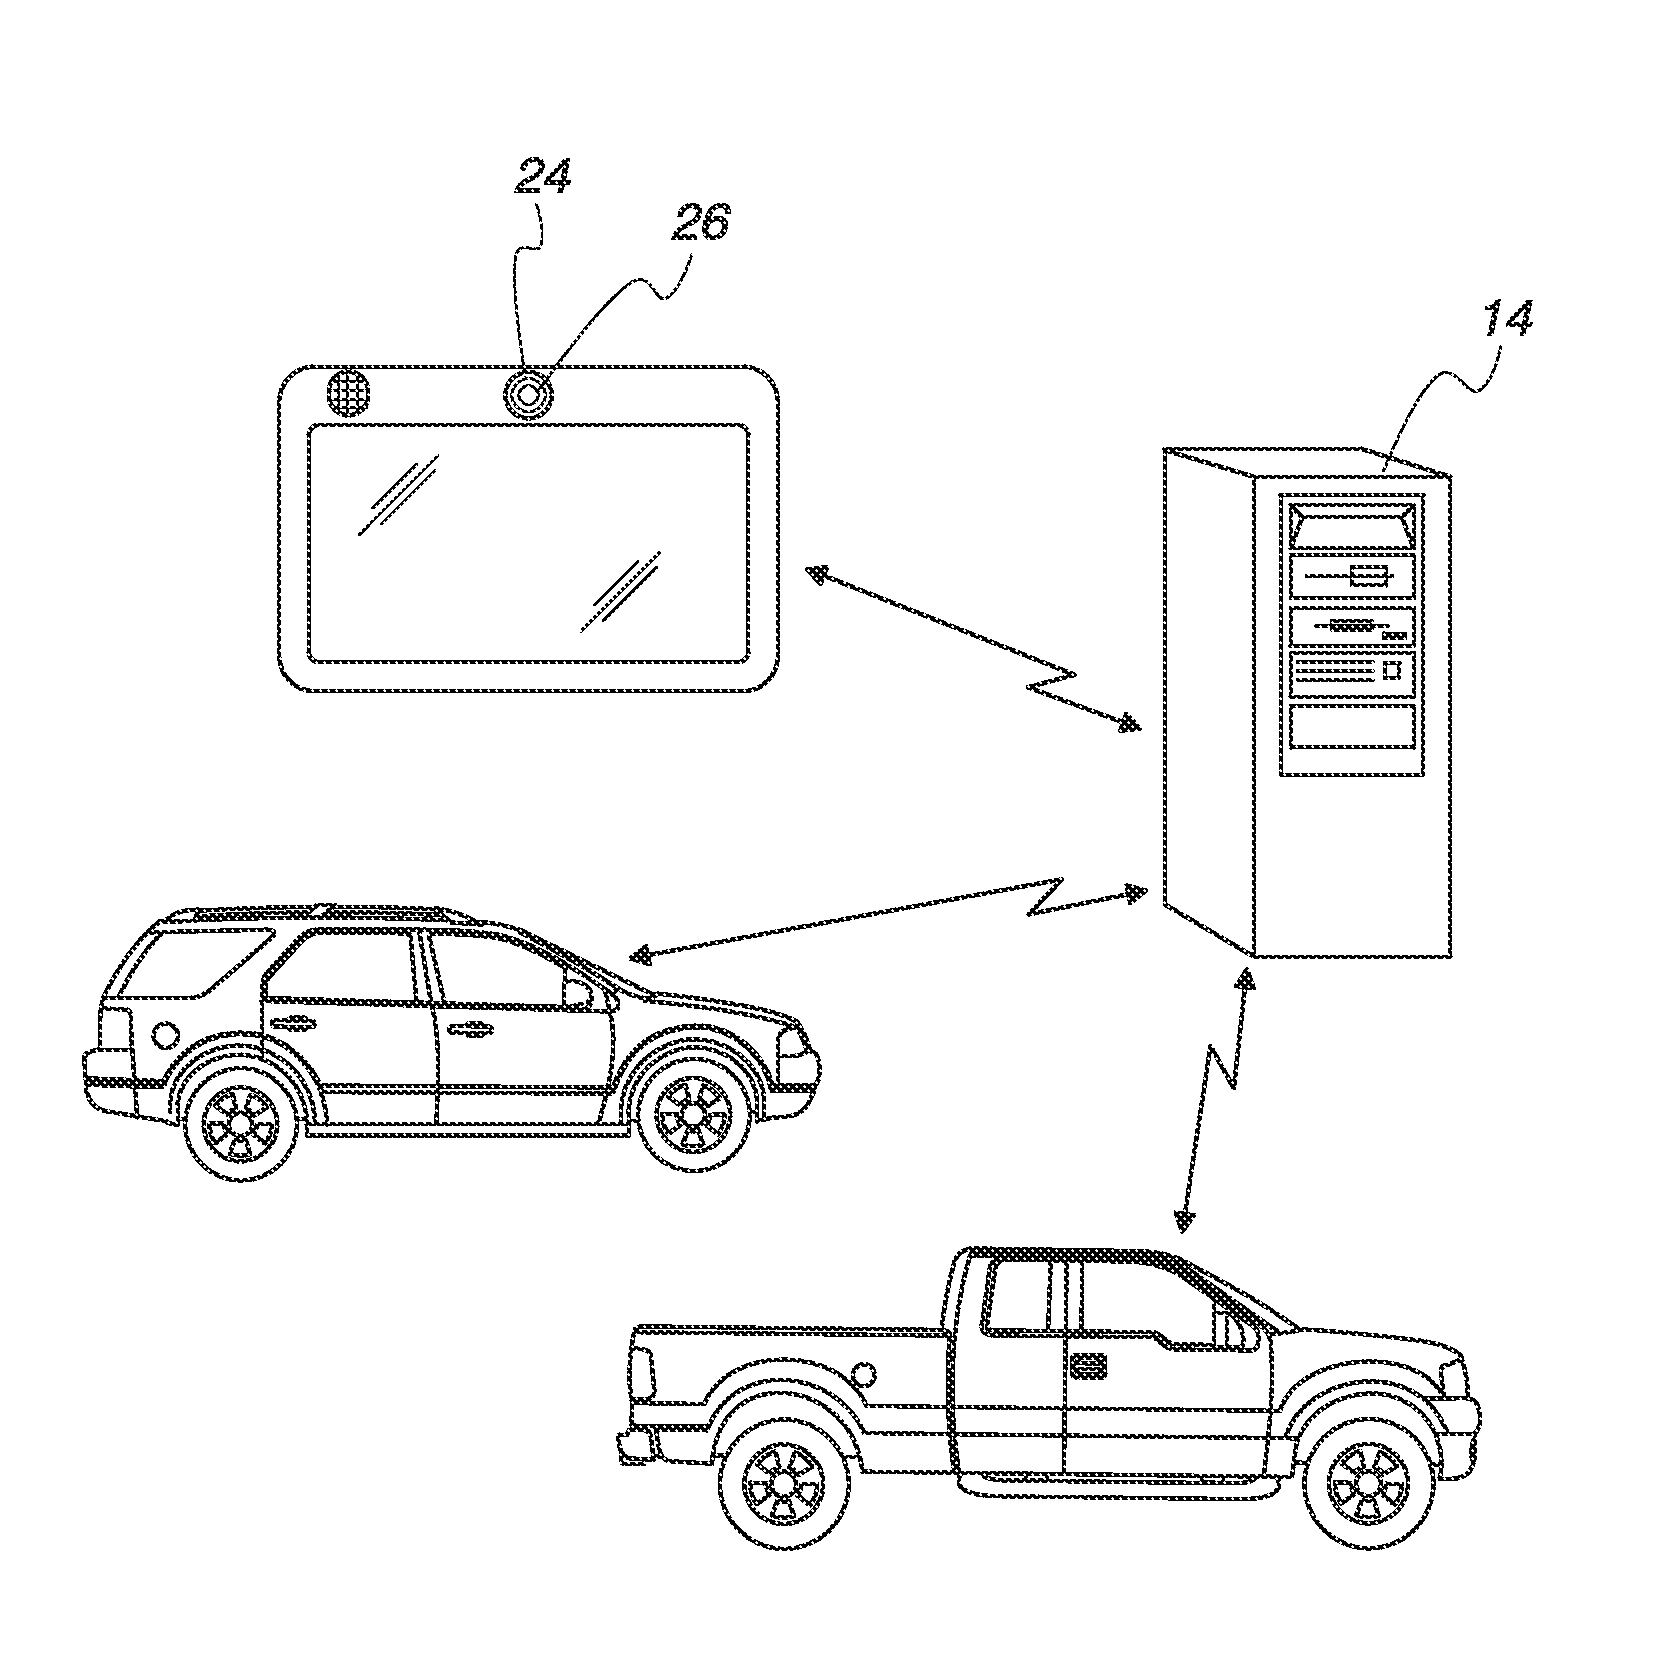 System and Method for Detecting and Remotely Assessing Vehicle Incidents and Dispatching Assistance